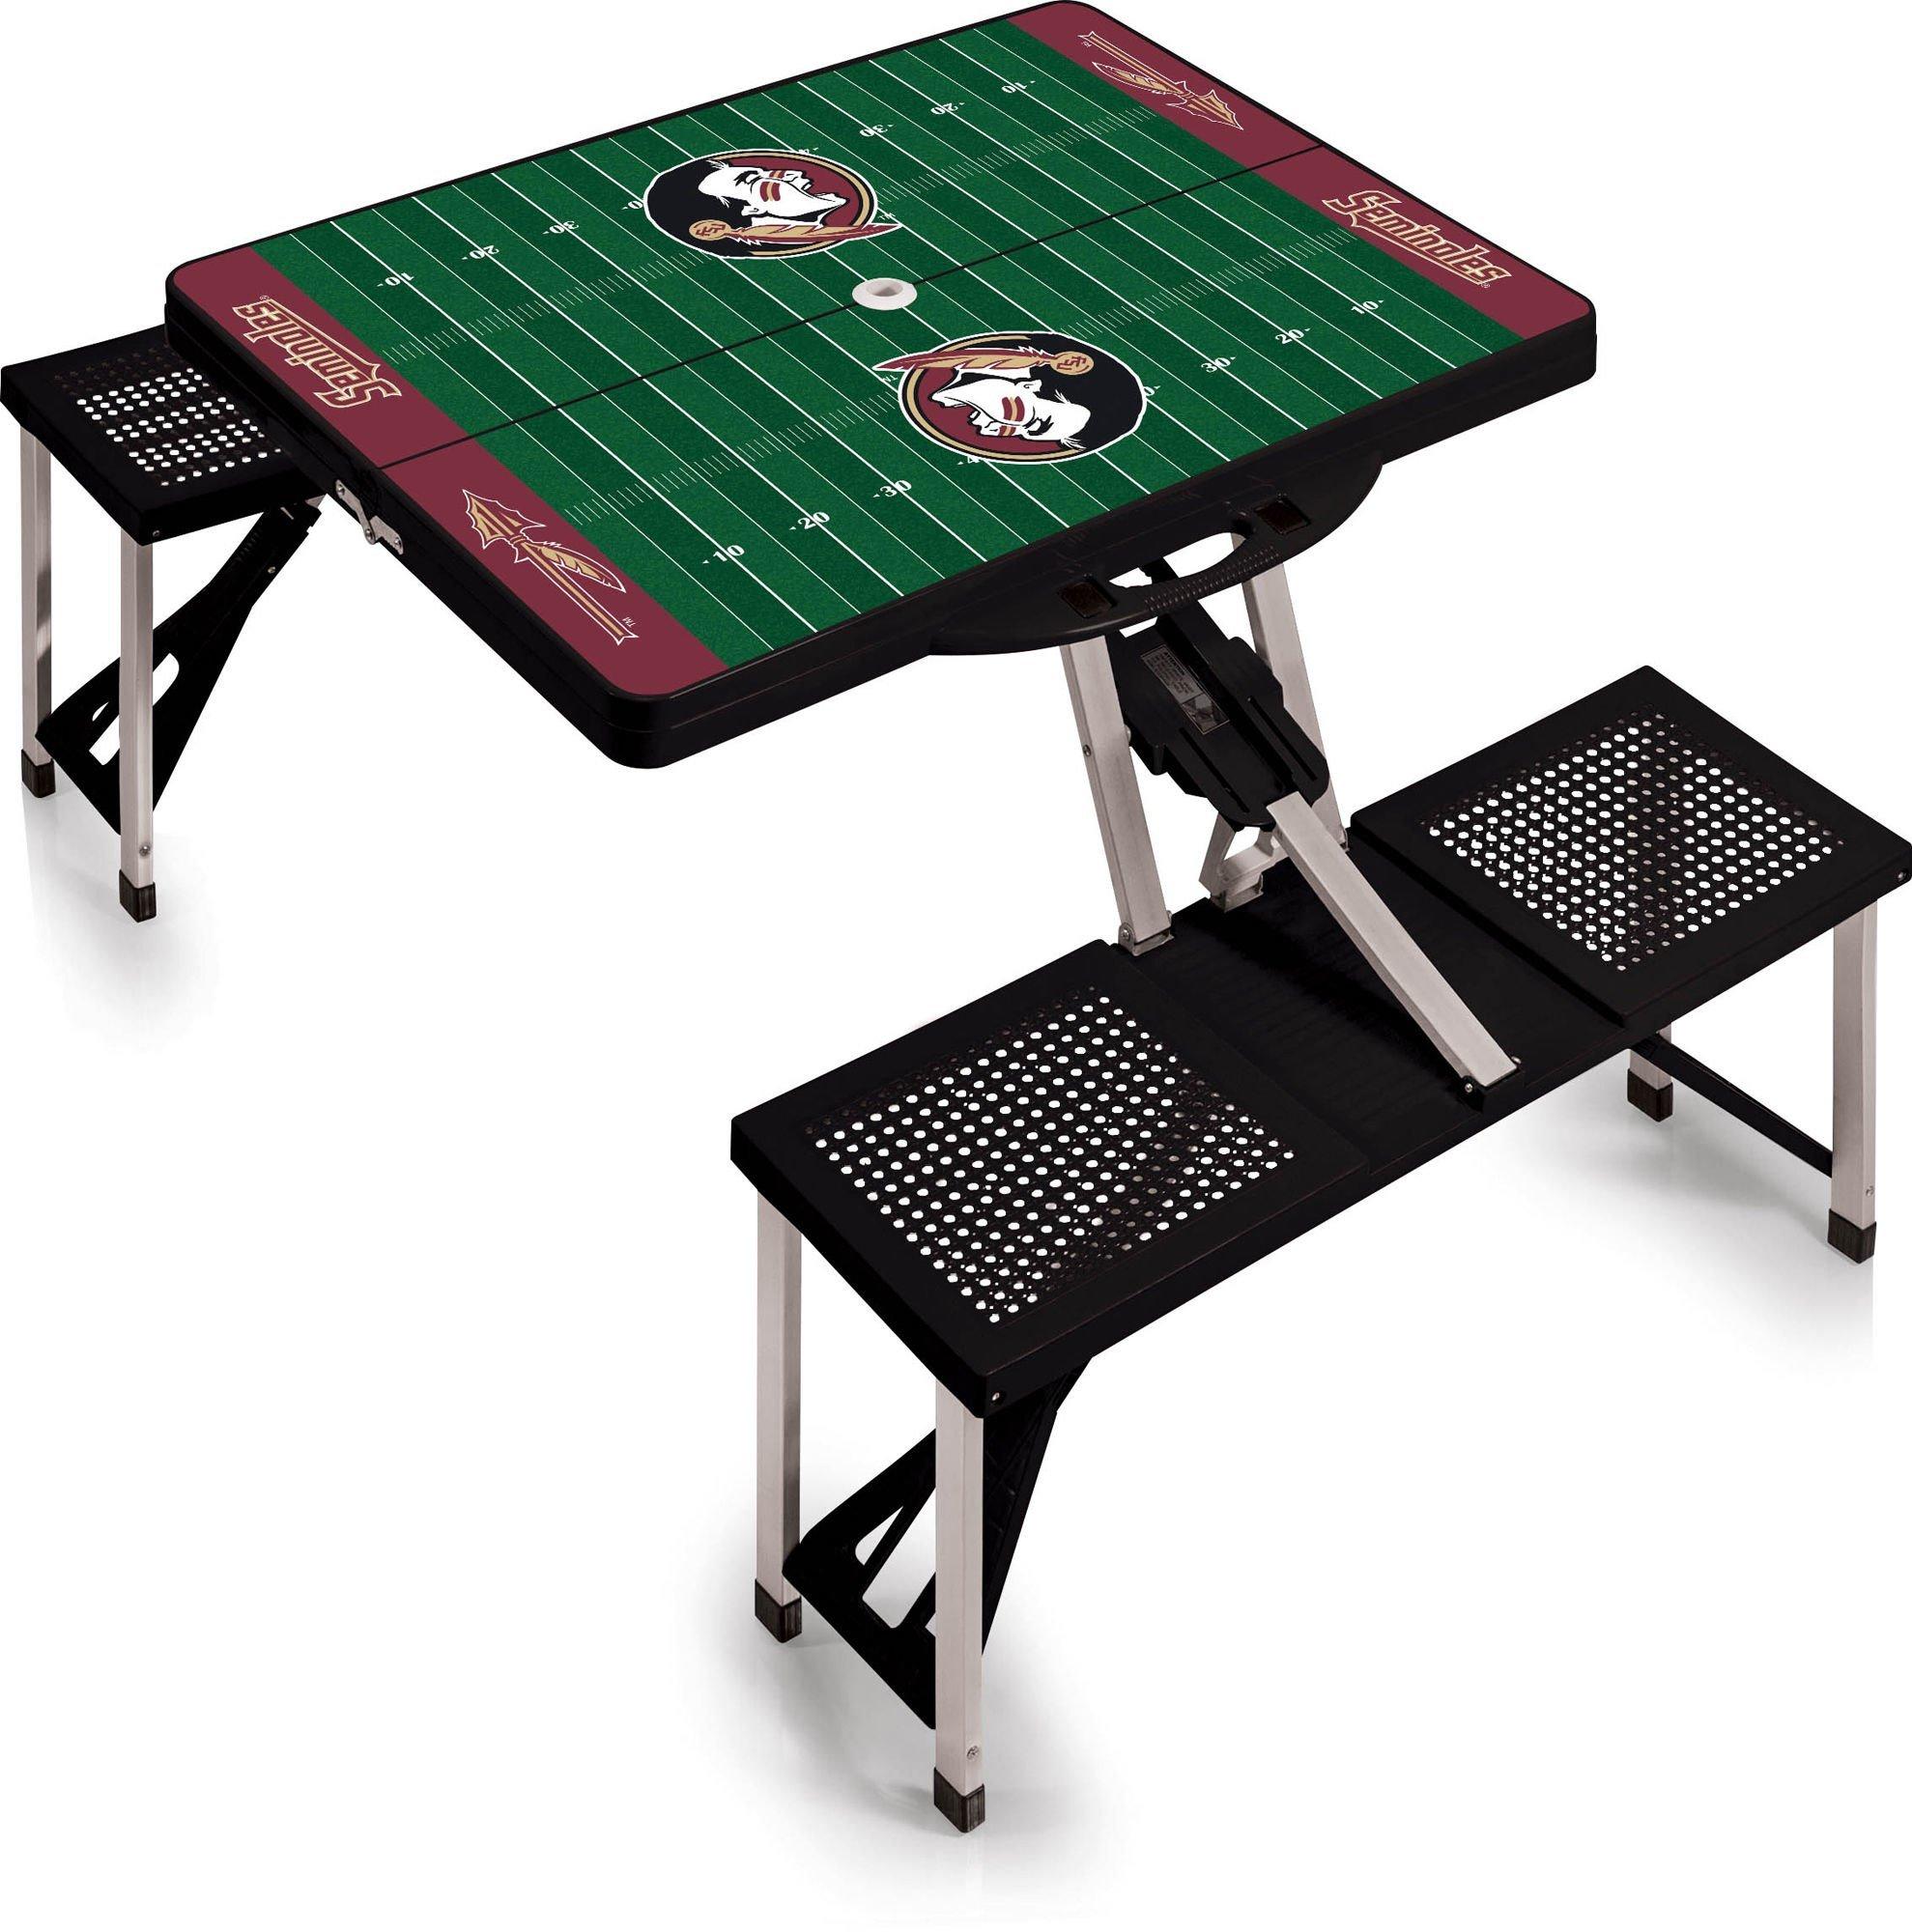 Florida State Folding Picnic Table by Picnic Time